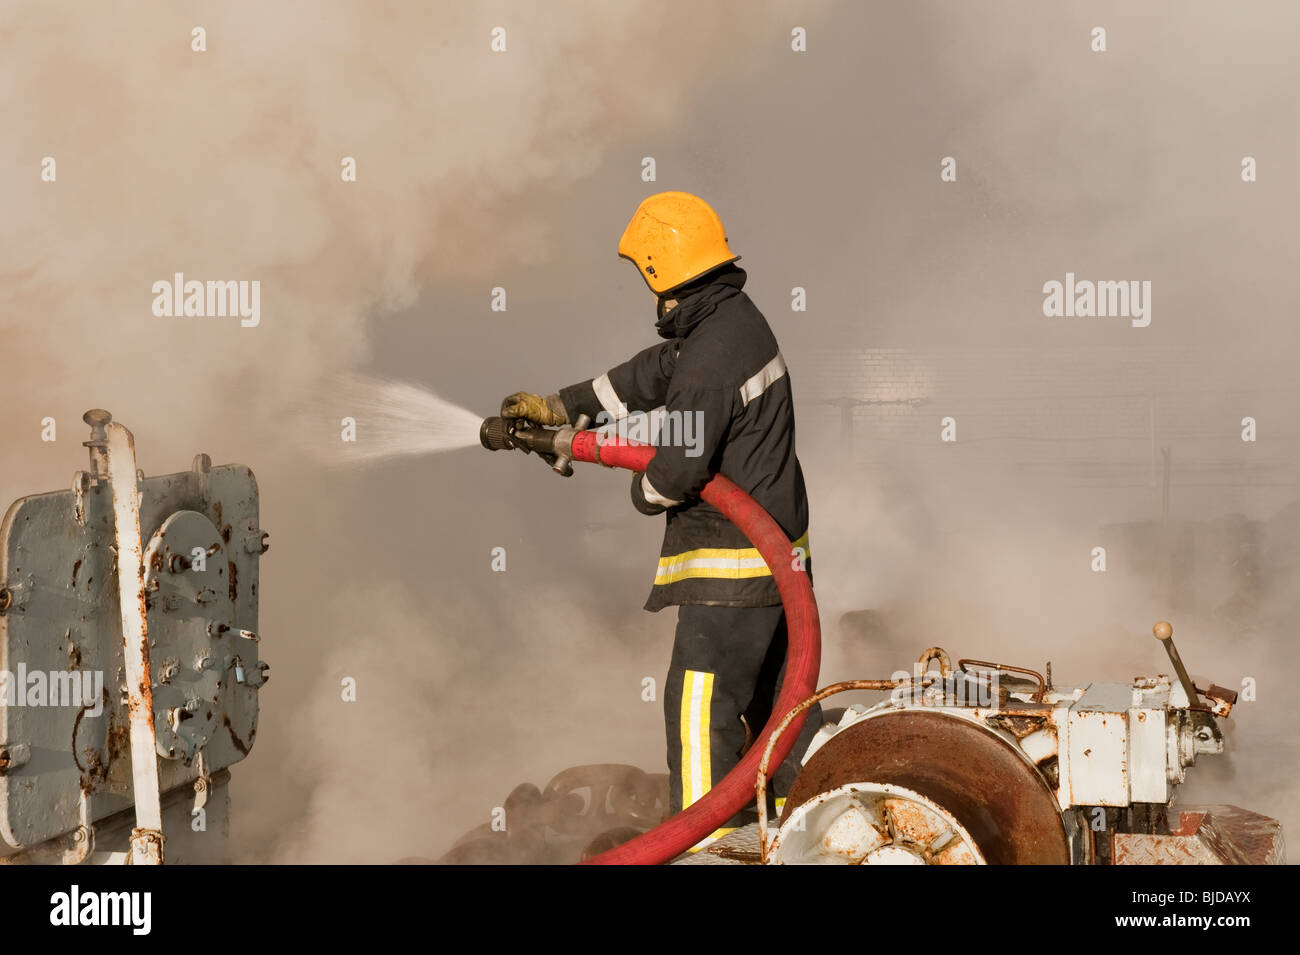 Fireman using hose on ships hold on fire Stock Photo